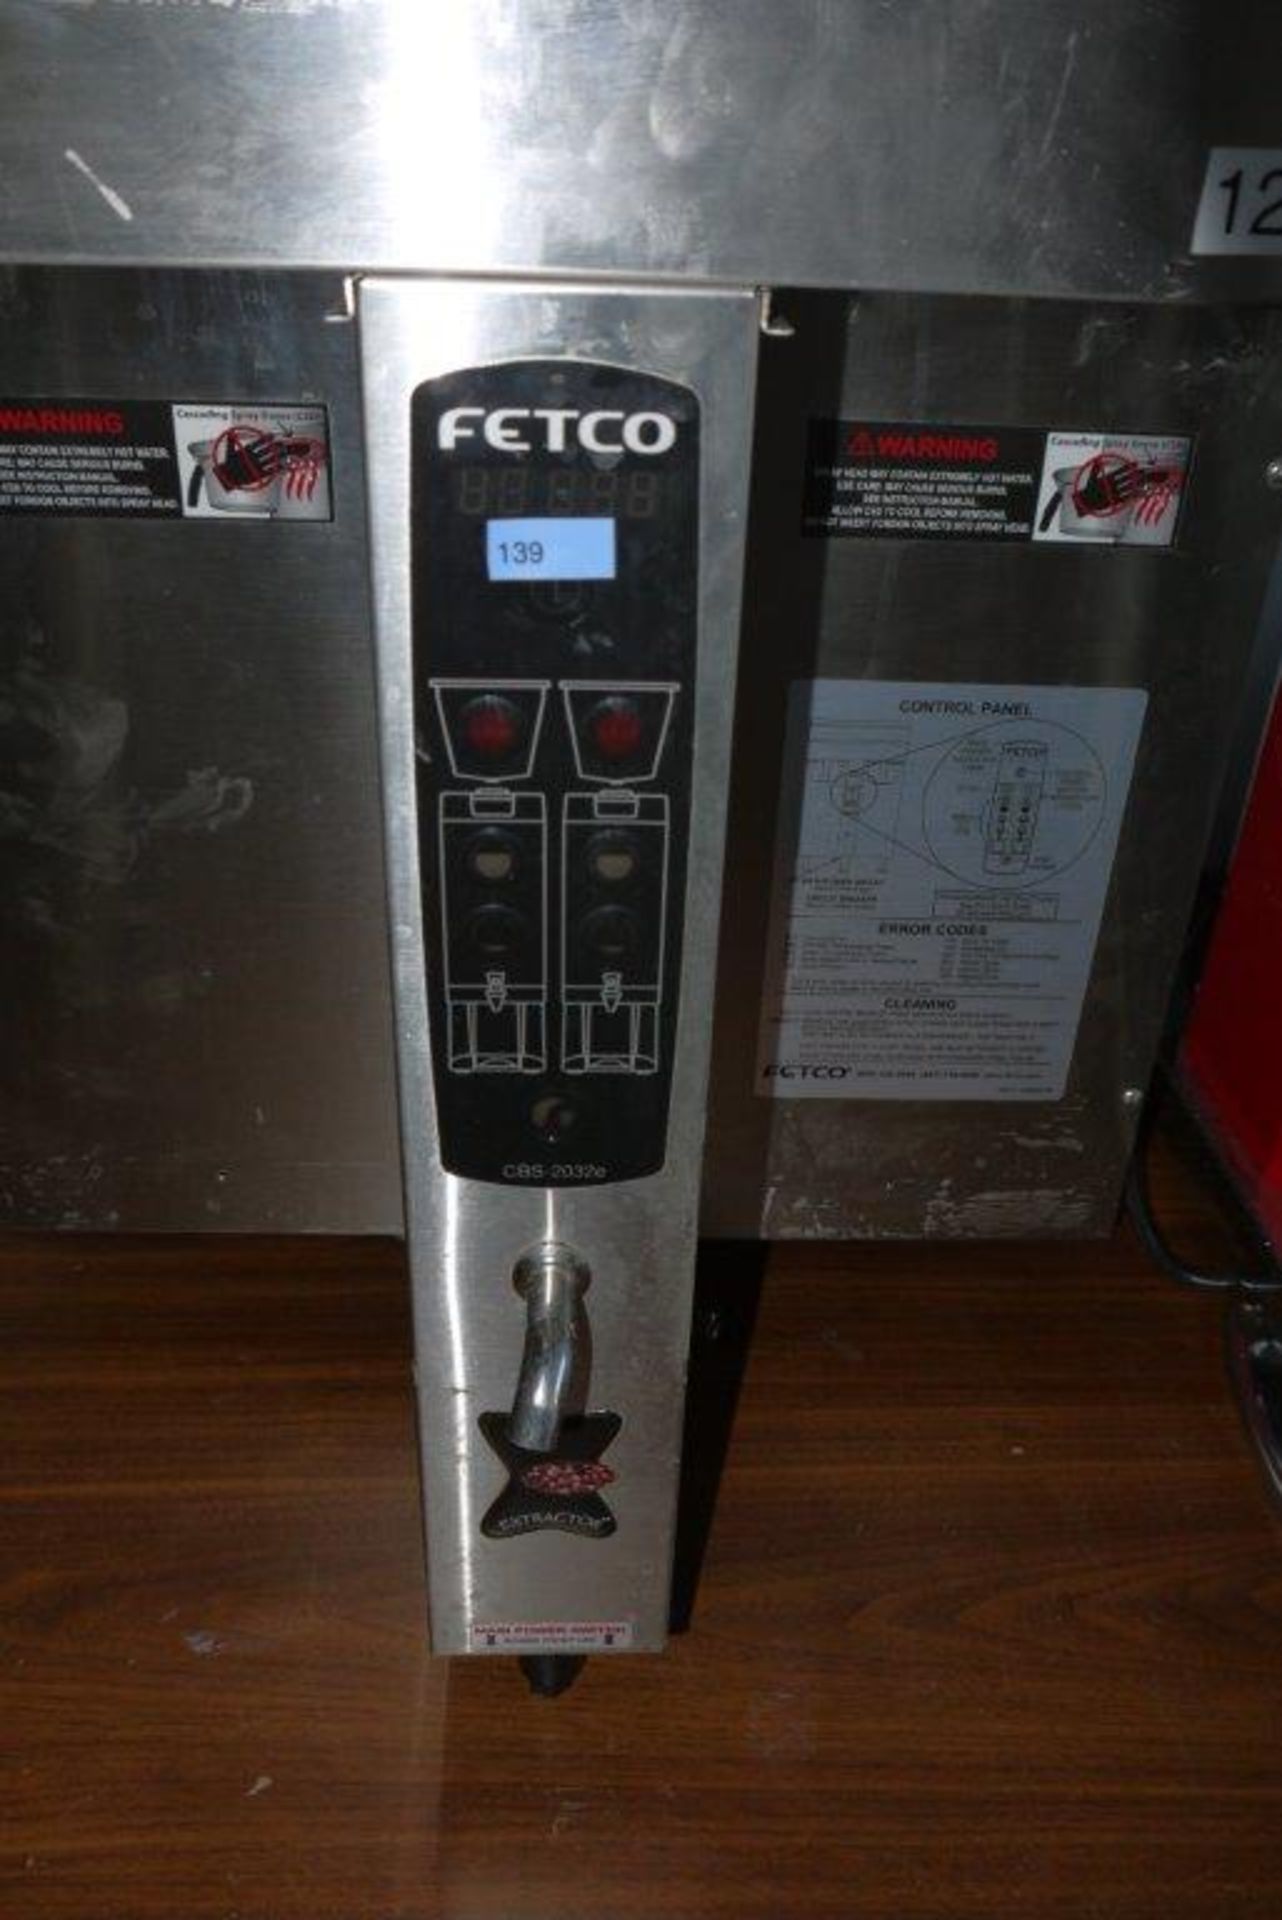 2013 FETCO DOUBLE STATION COFFEE BREWER, MODEL CBS 2032E, S/N 720143138478, SINGLE PHASE, C/W - Image 6 of 9